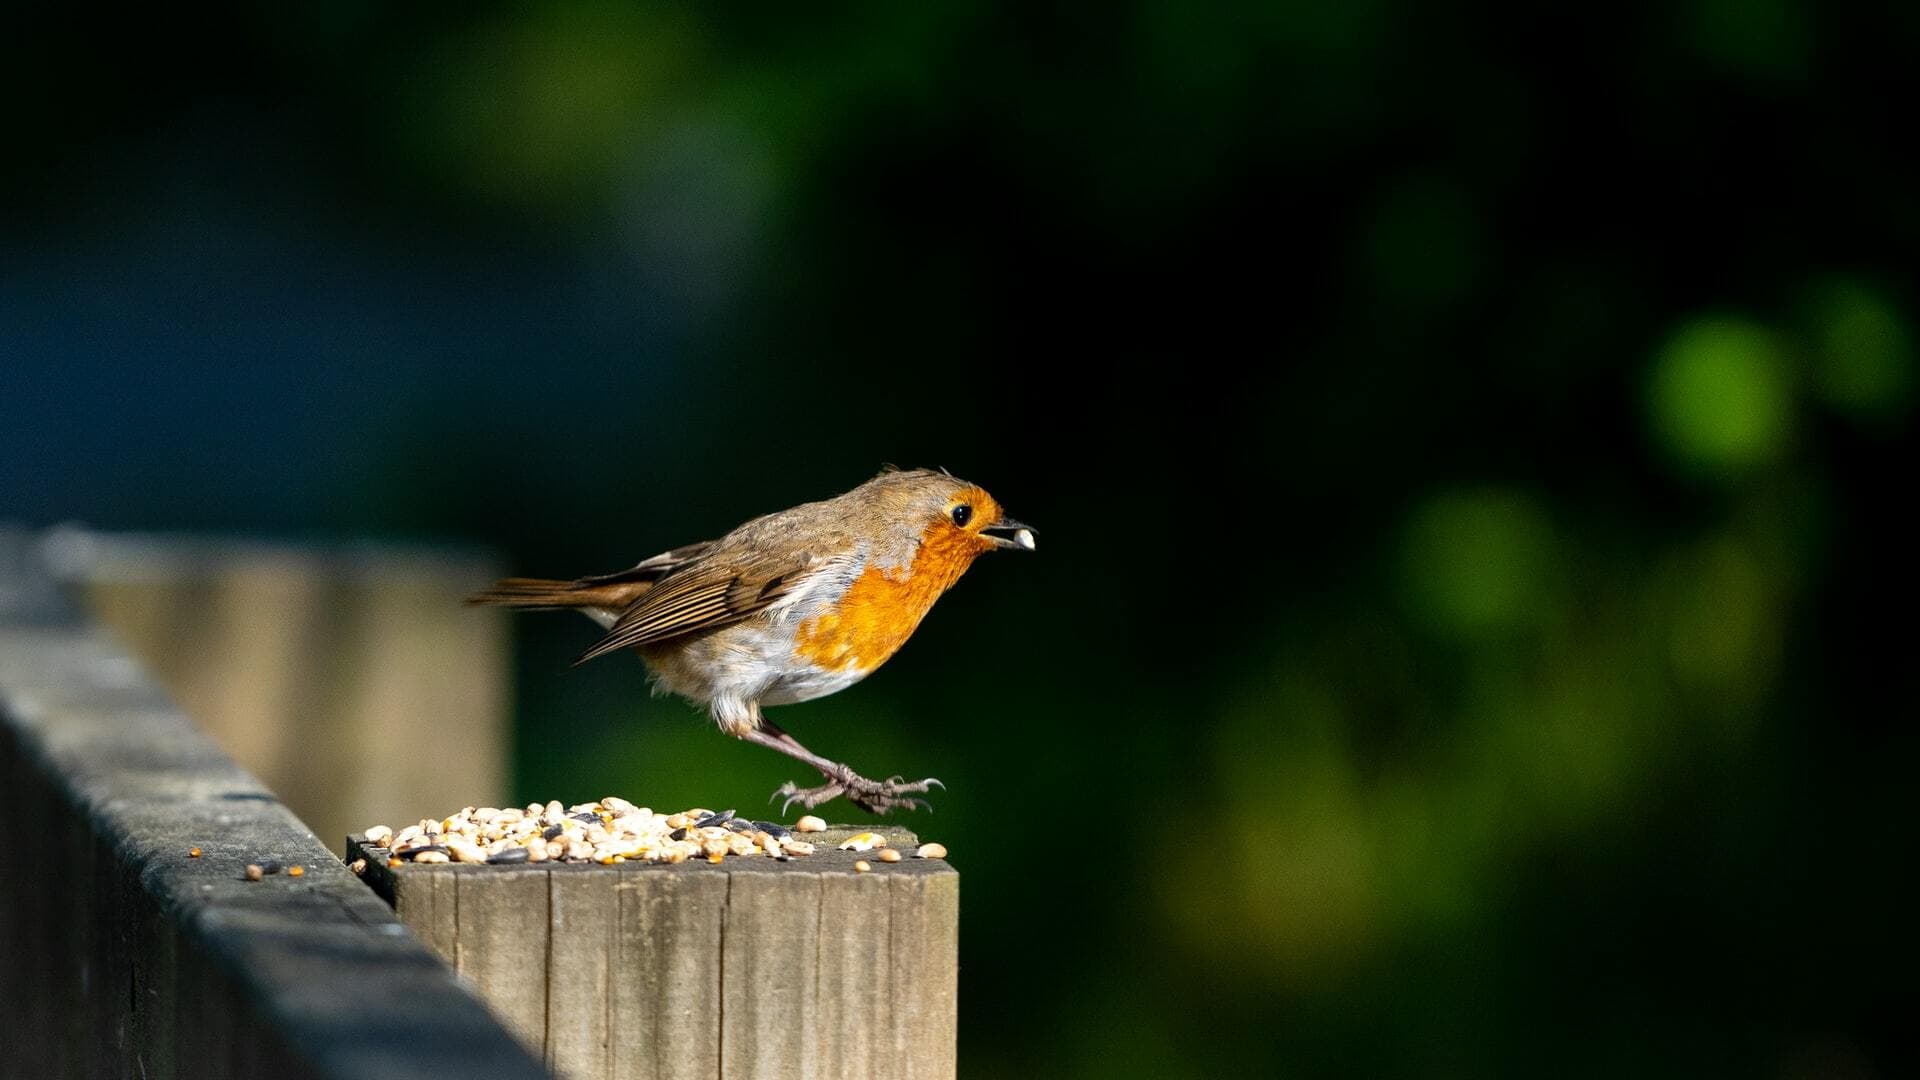 How to to attract birds to your garden